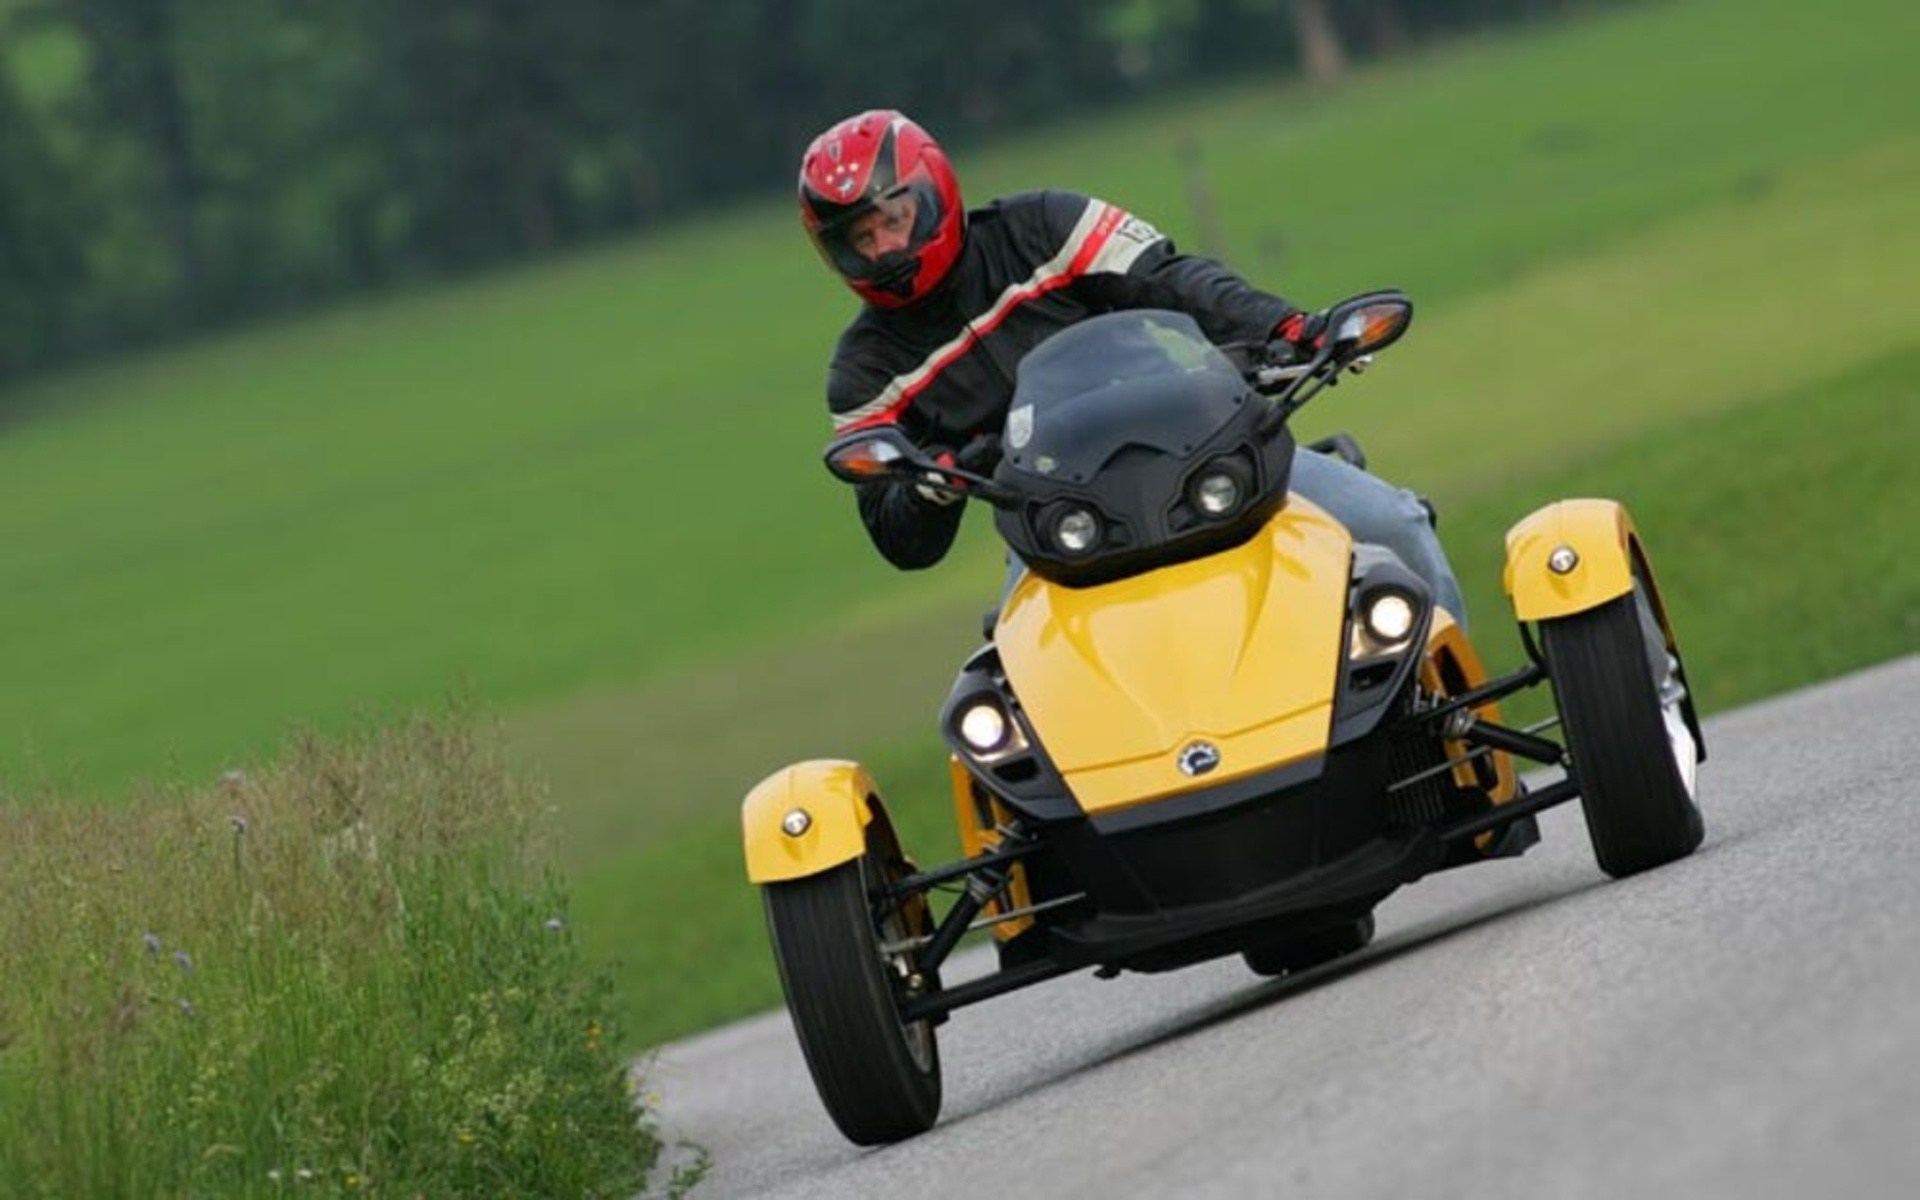  Yellow 2007 CanAm Spyder on road